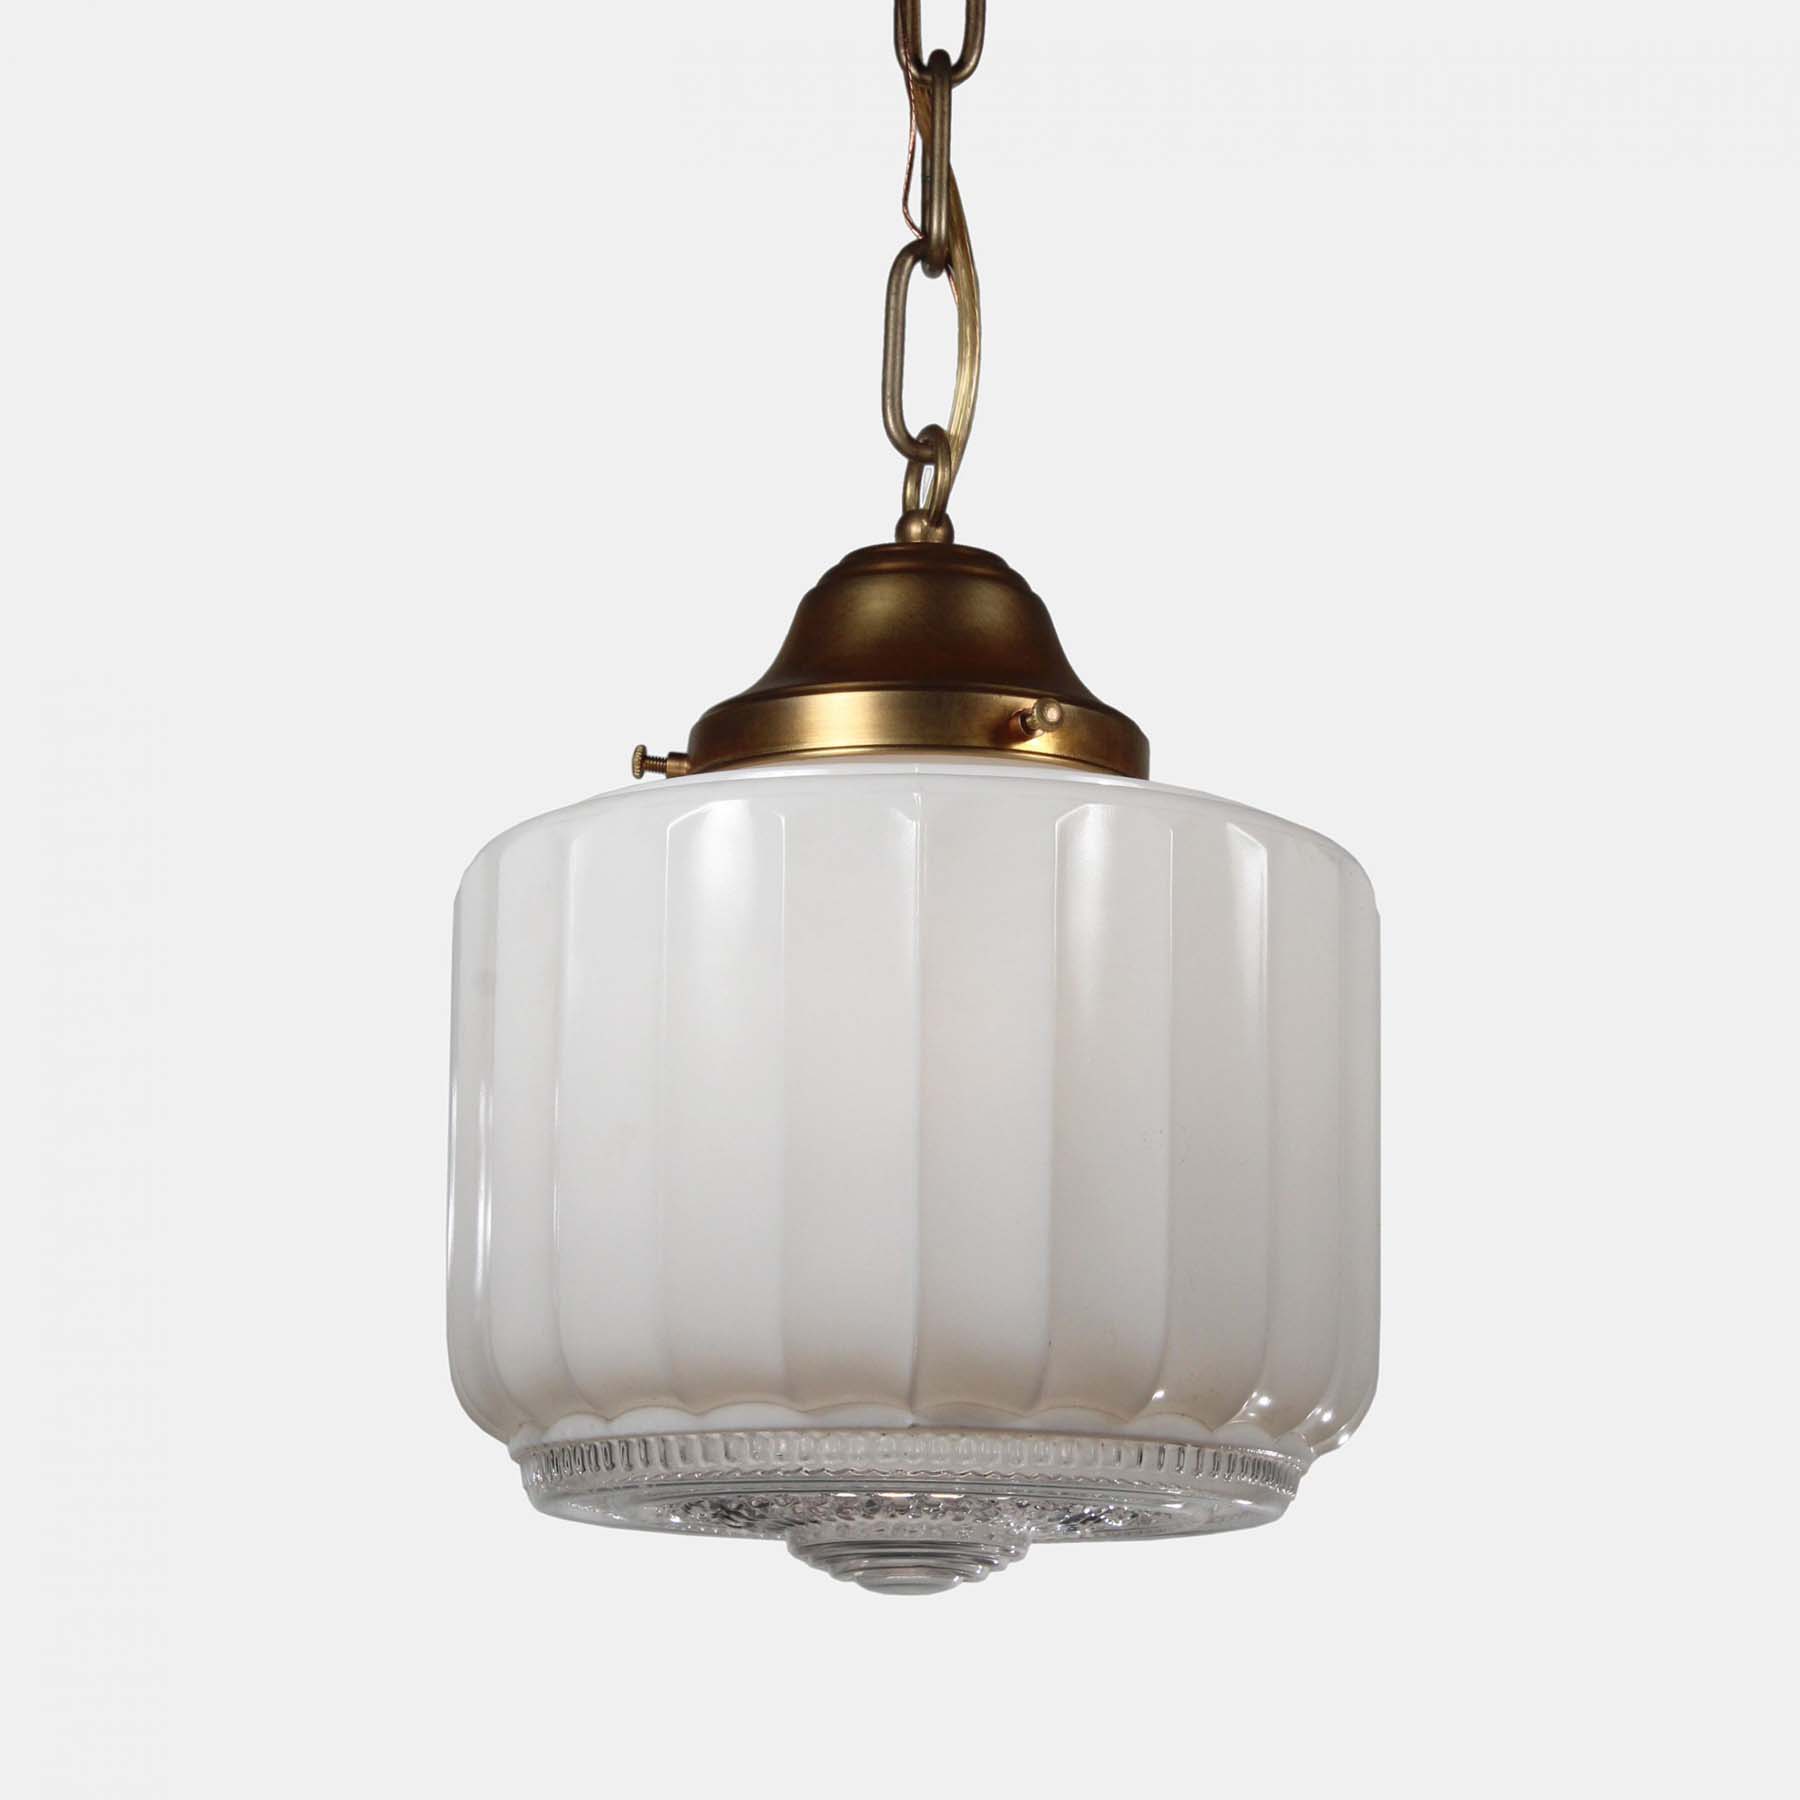 SOLD Matching Antique Pendant Lights with Unusual Shade-72345